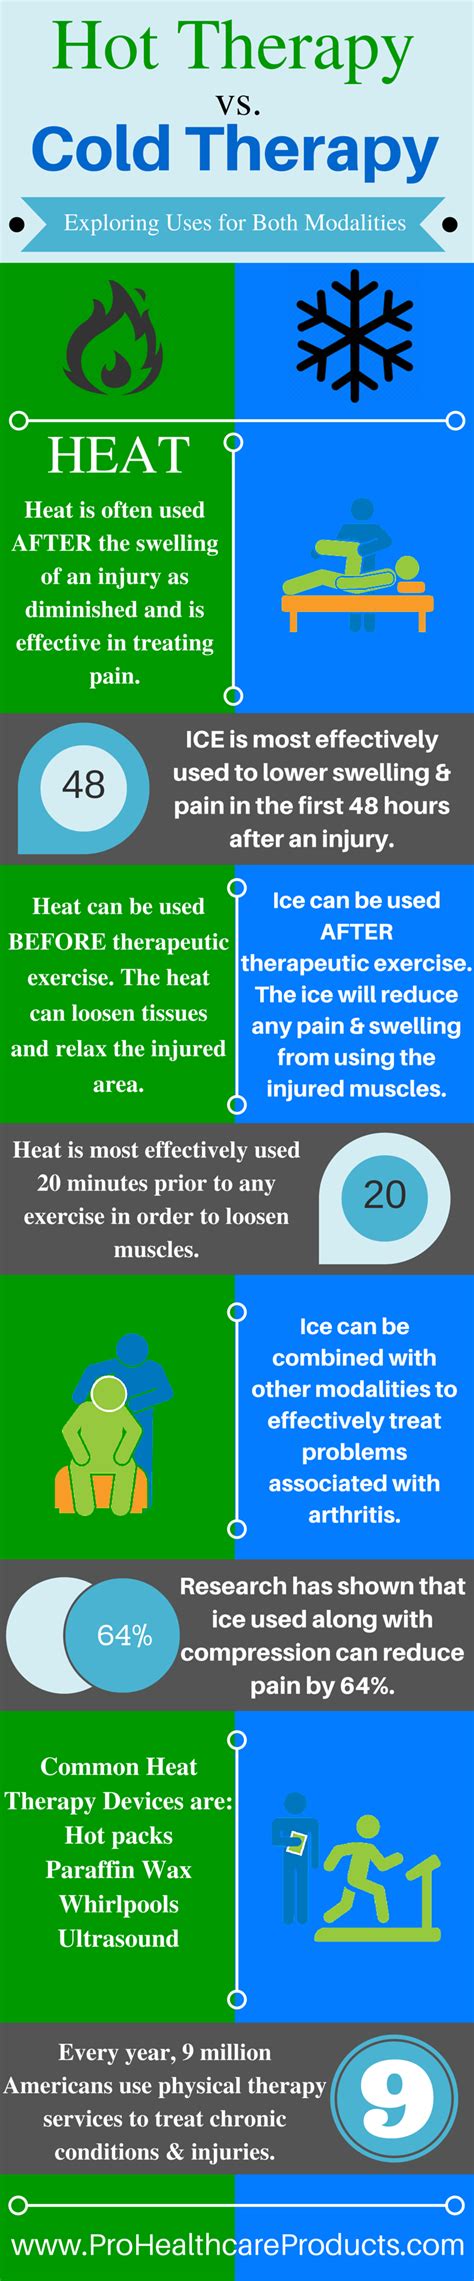 Hot Therapy Vs Cold Therapy Infographic